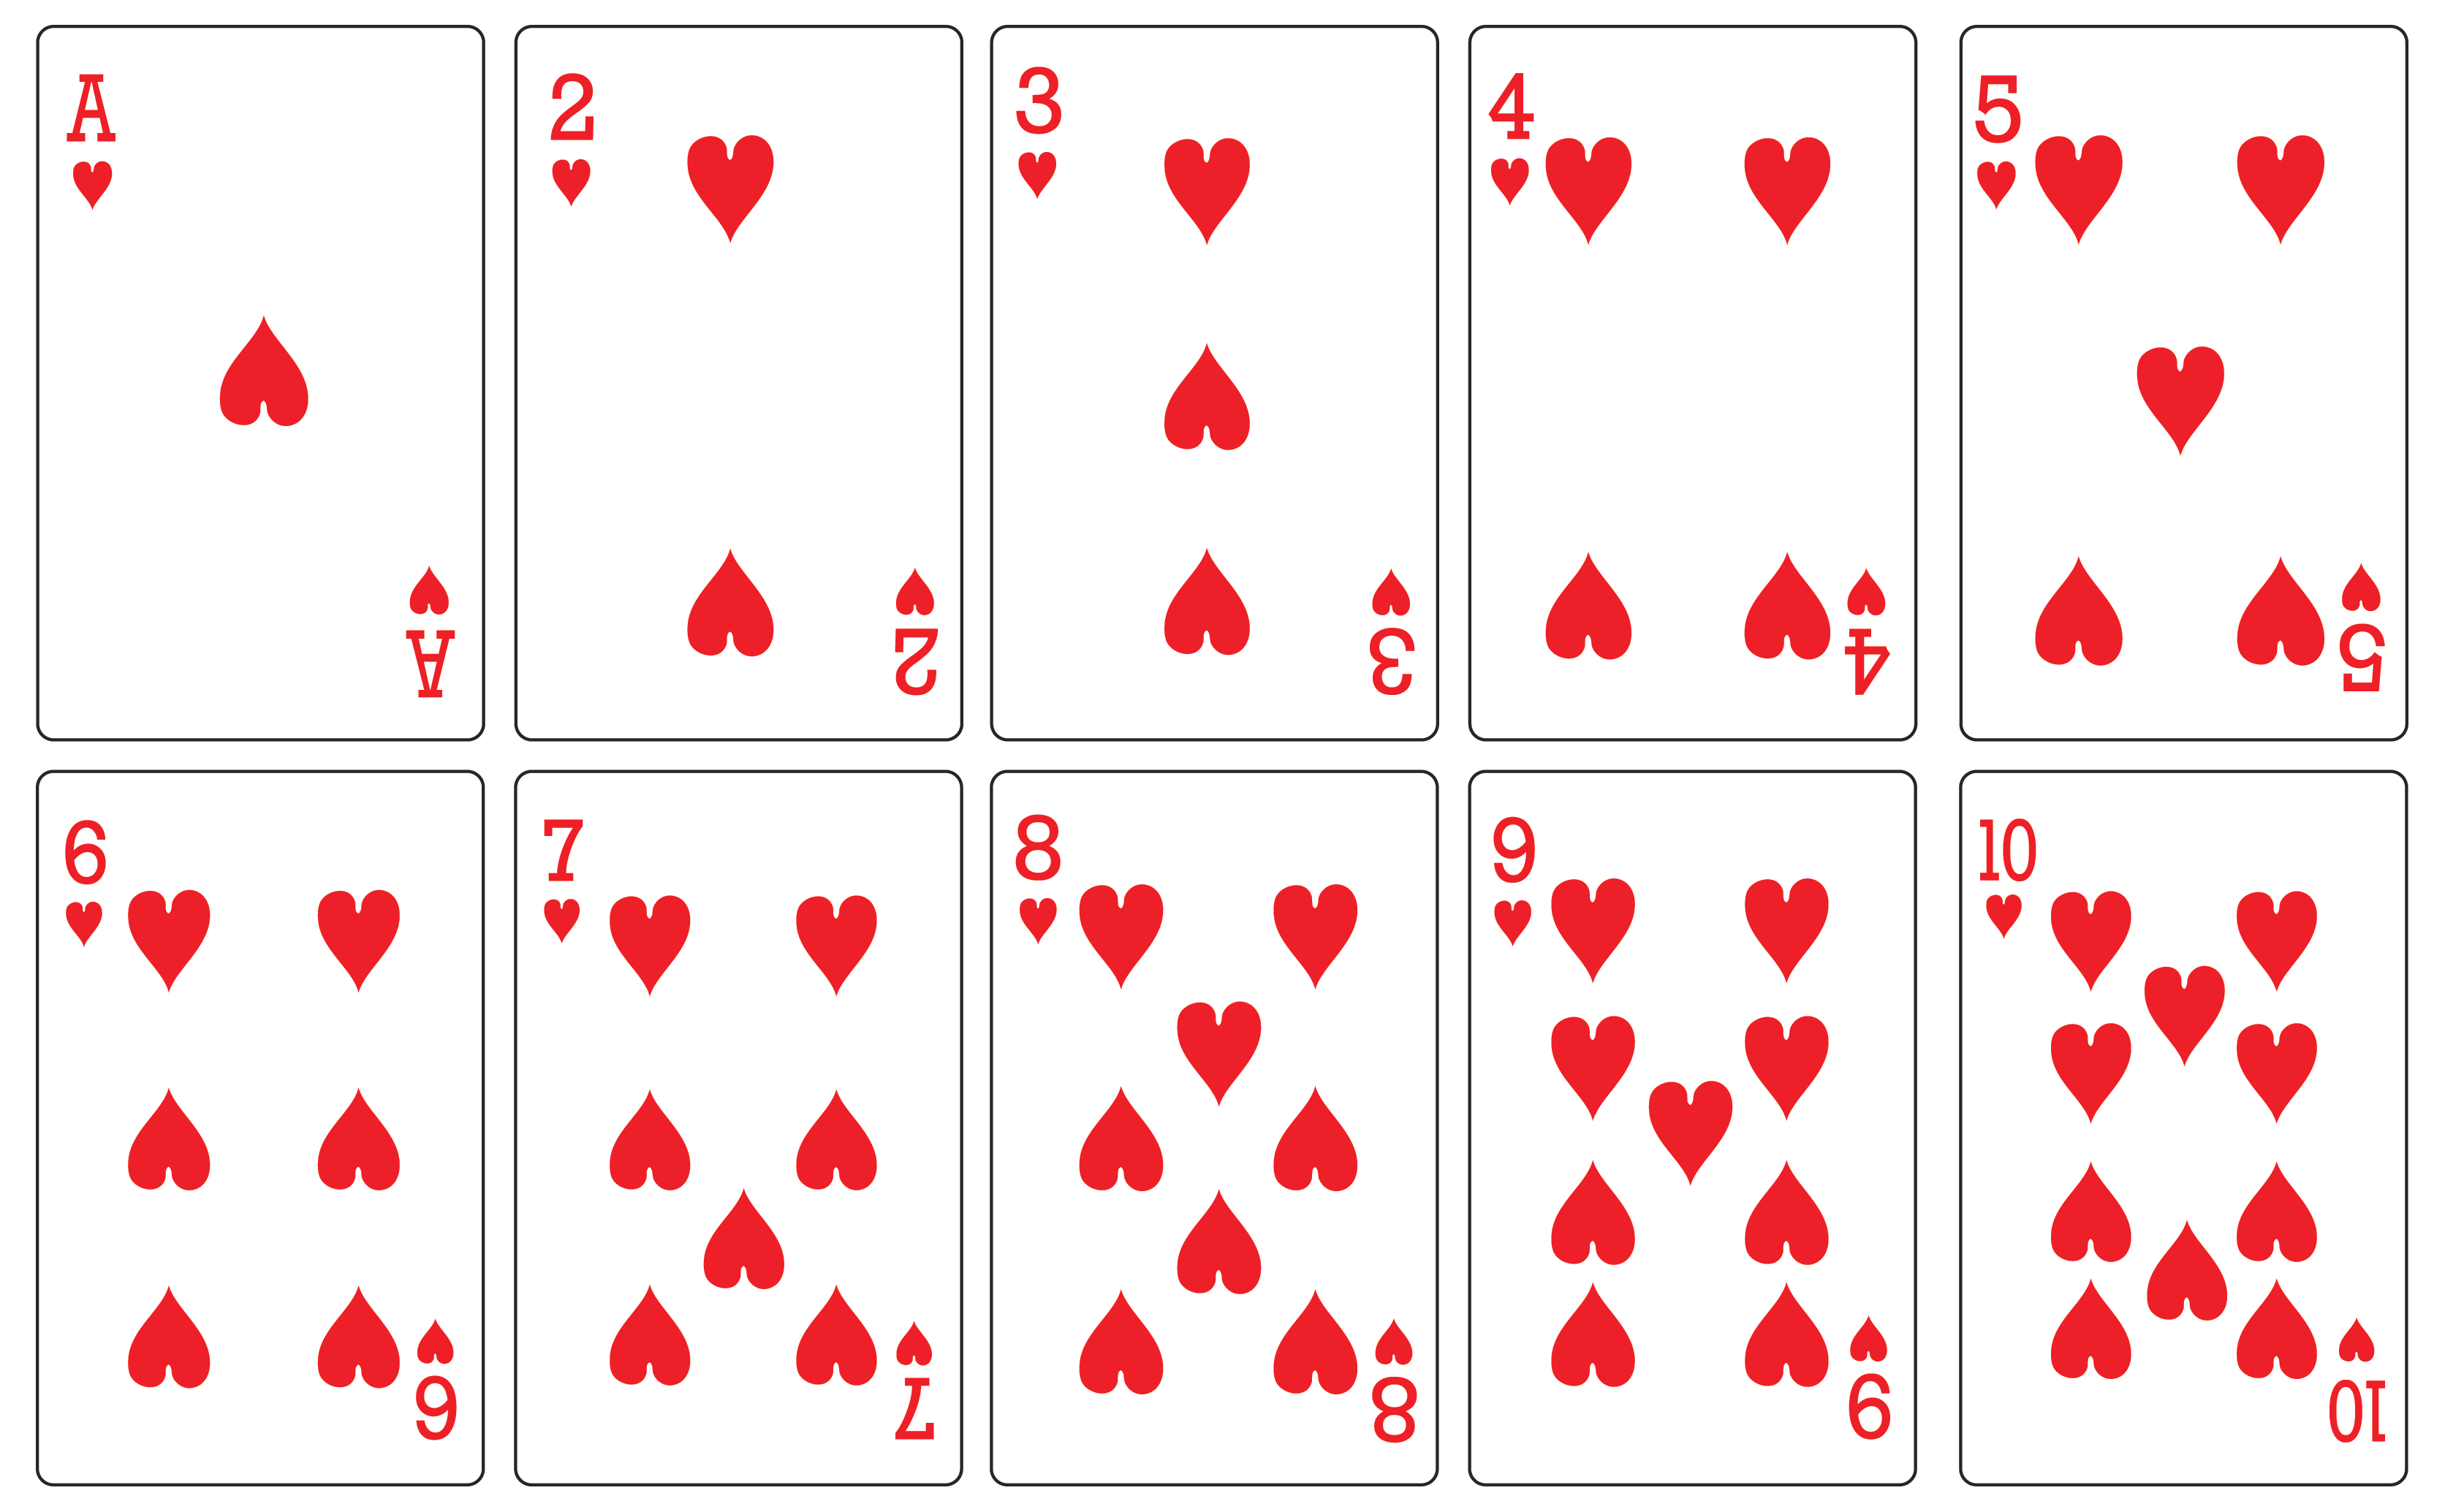 How To Play Hearts With 3 Players